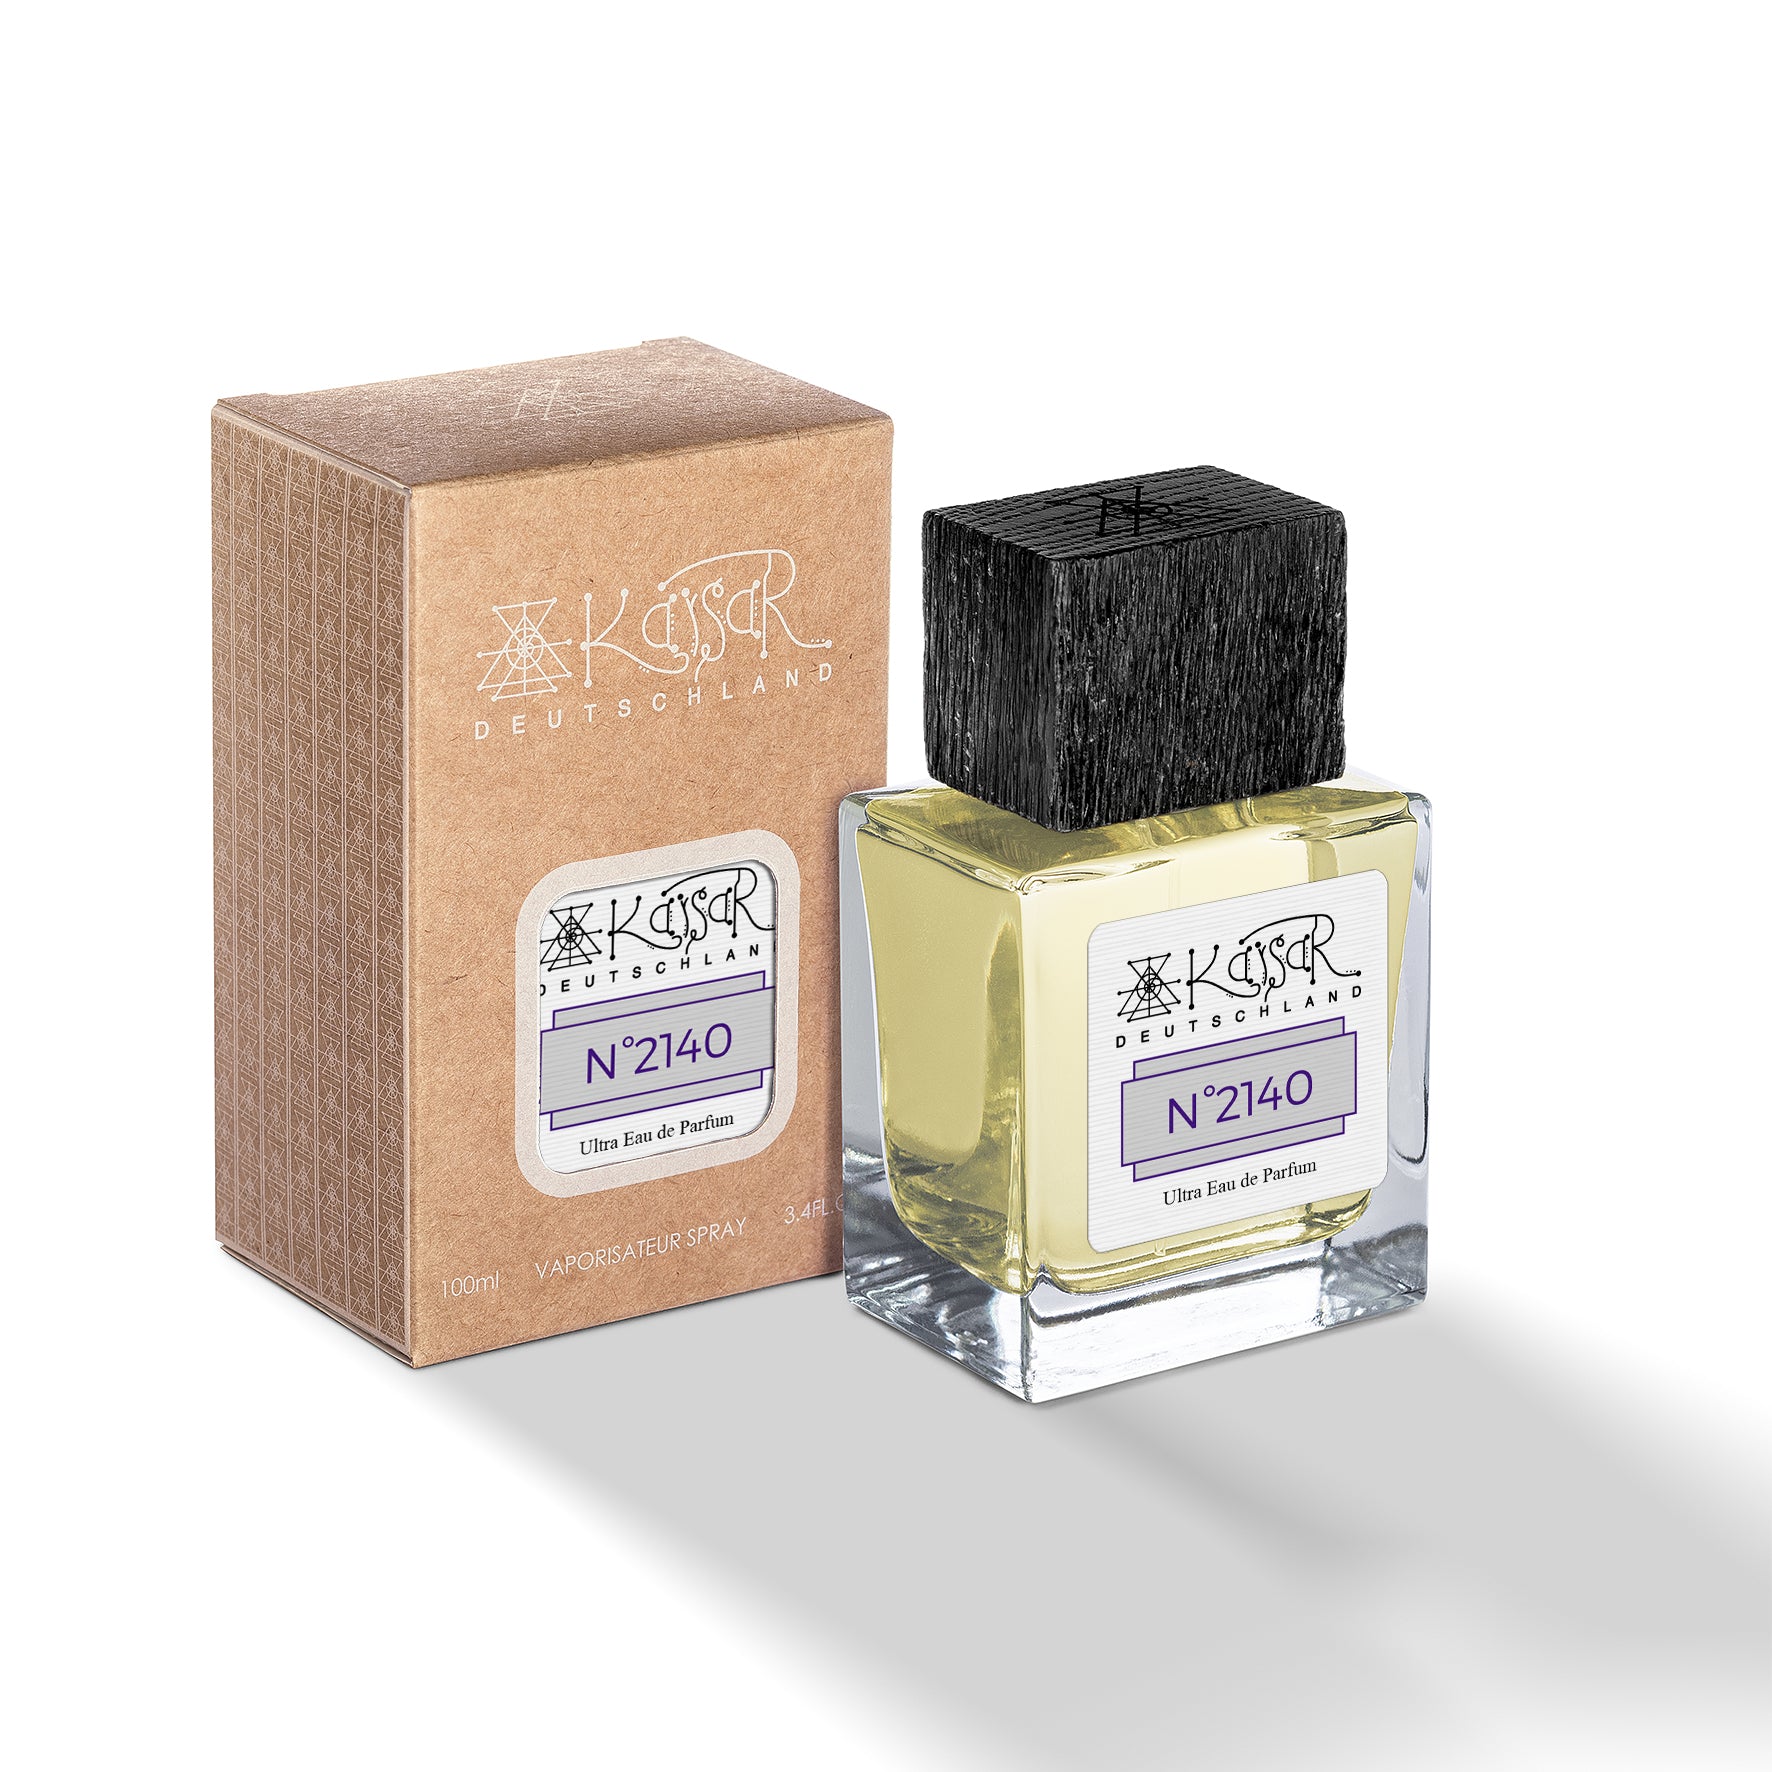 DH 2140 Haut Luxe Scent